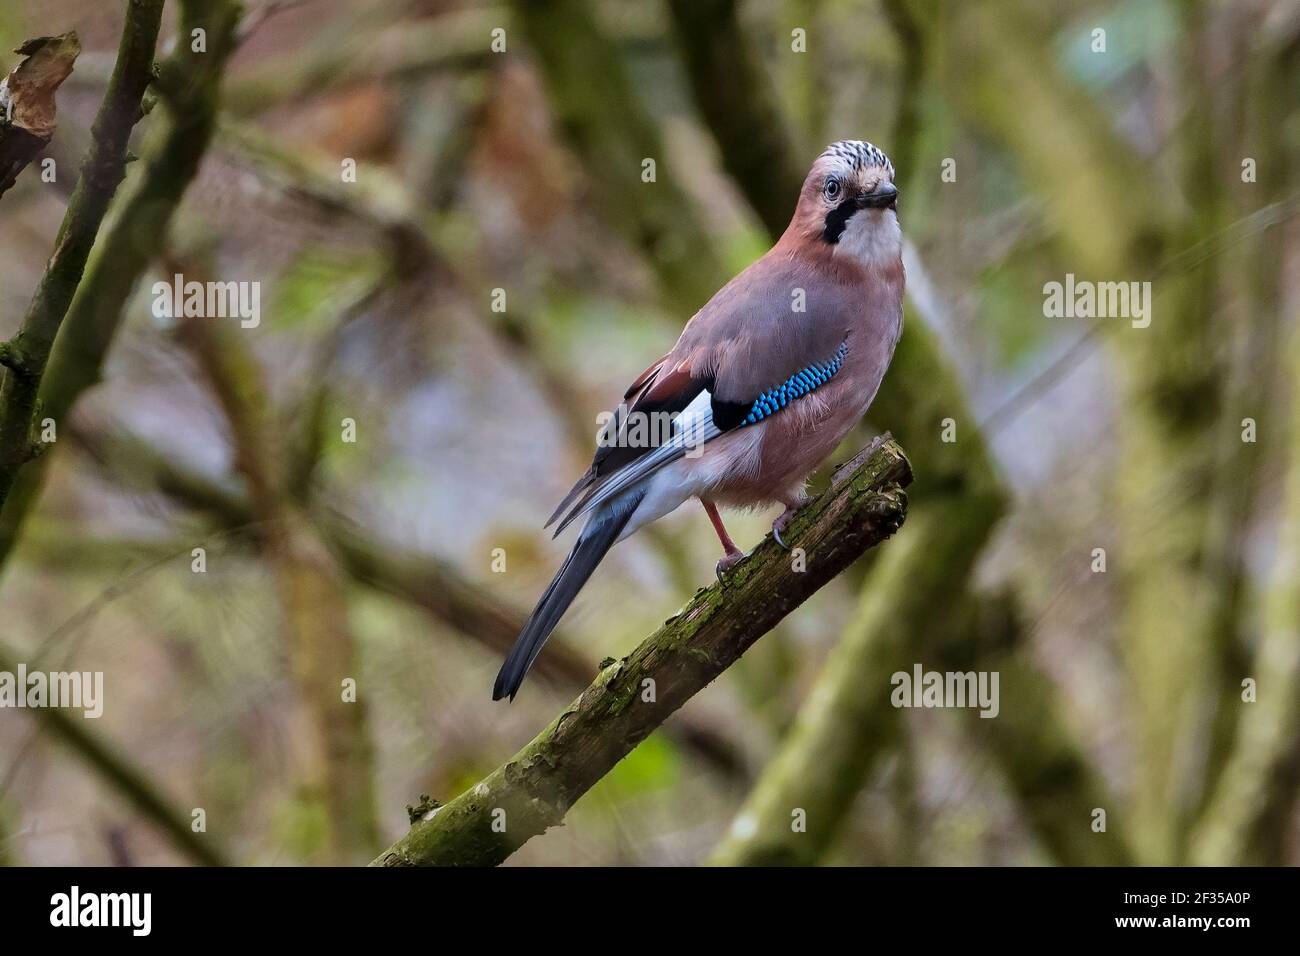 Bluejay, Jay perched on a branch. Stock Photo